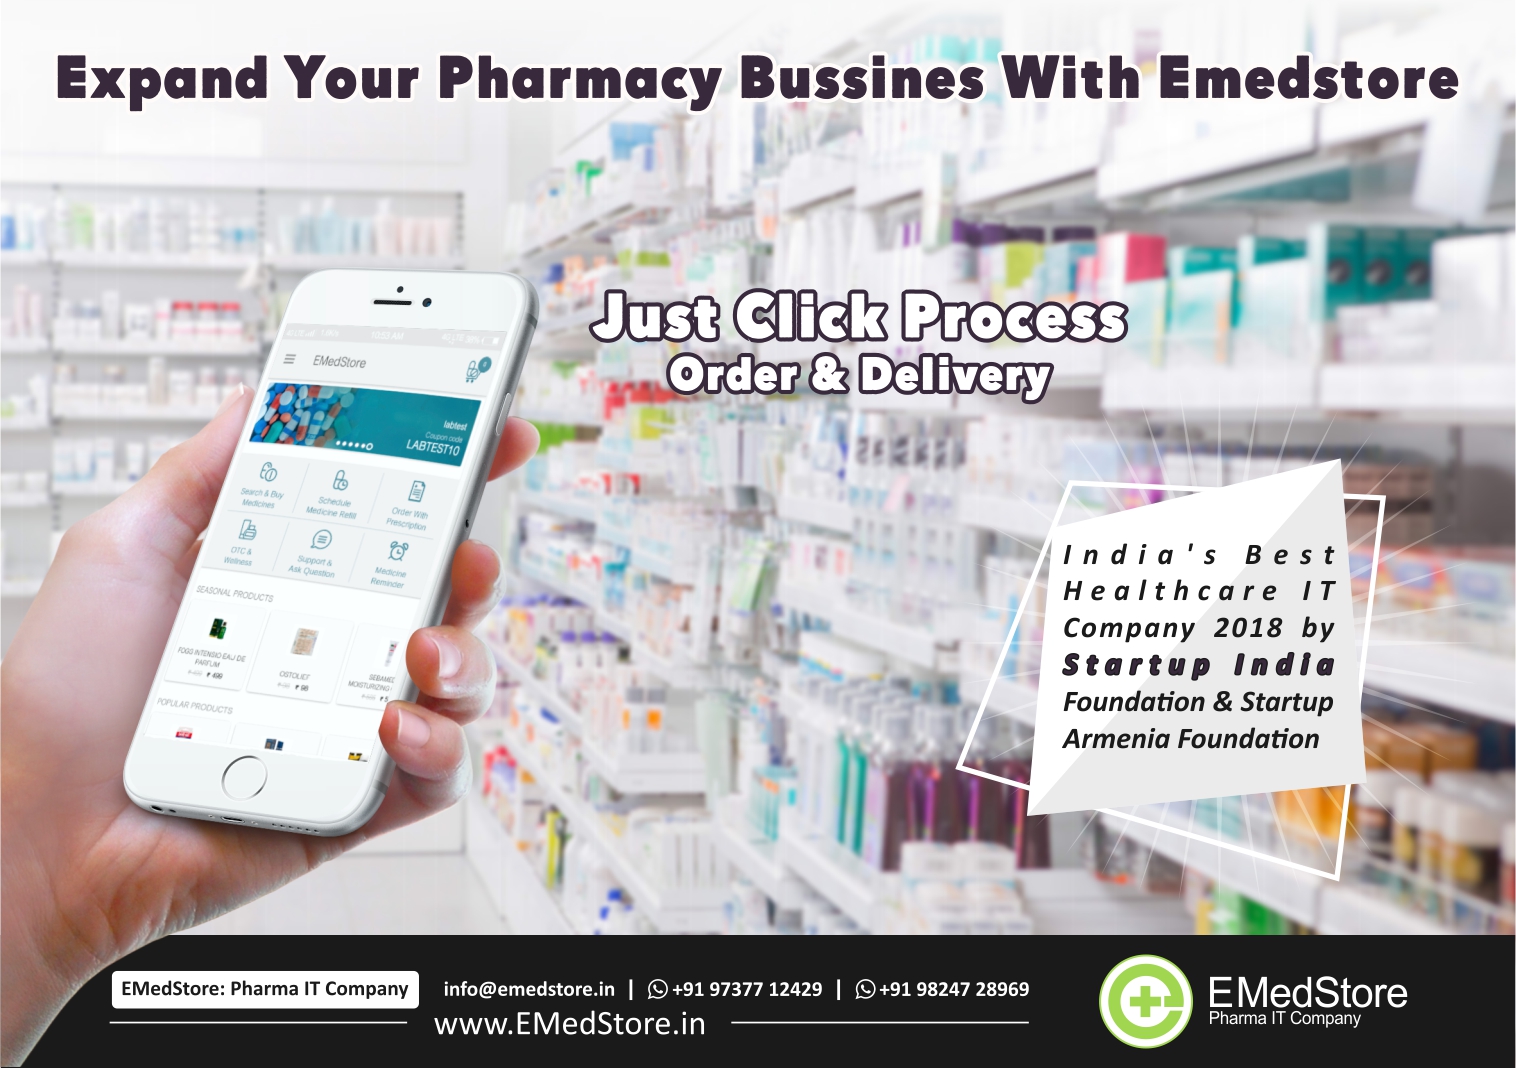 Is online pharmacy can save money and increase productivity?